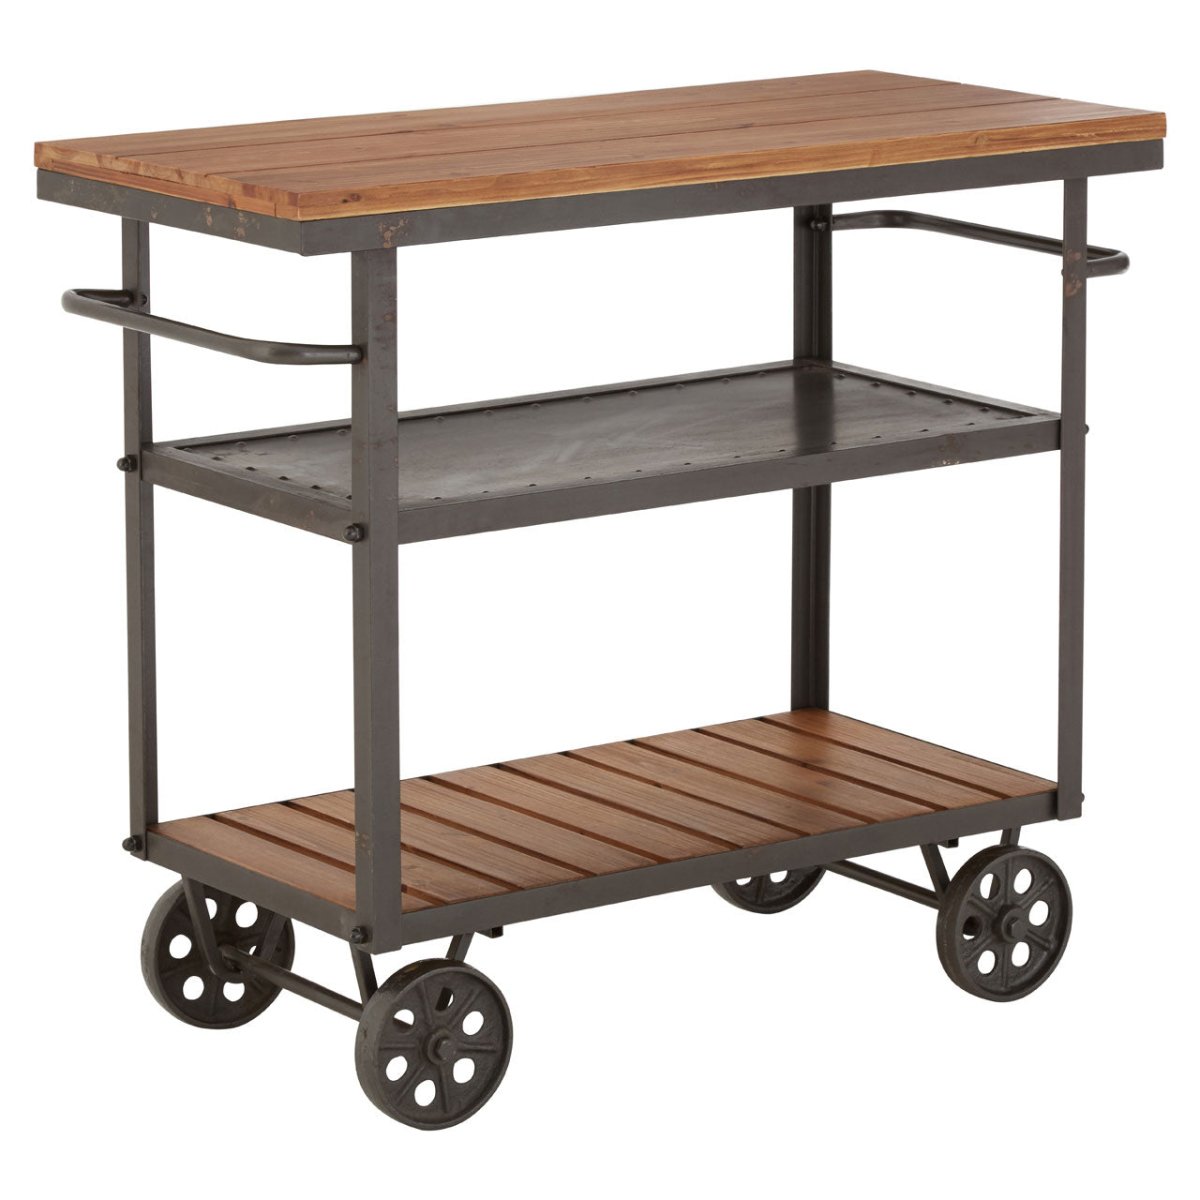 Wooden Foundry Table Cart With Wheels - Bonnypack